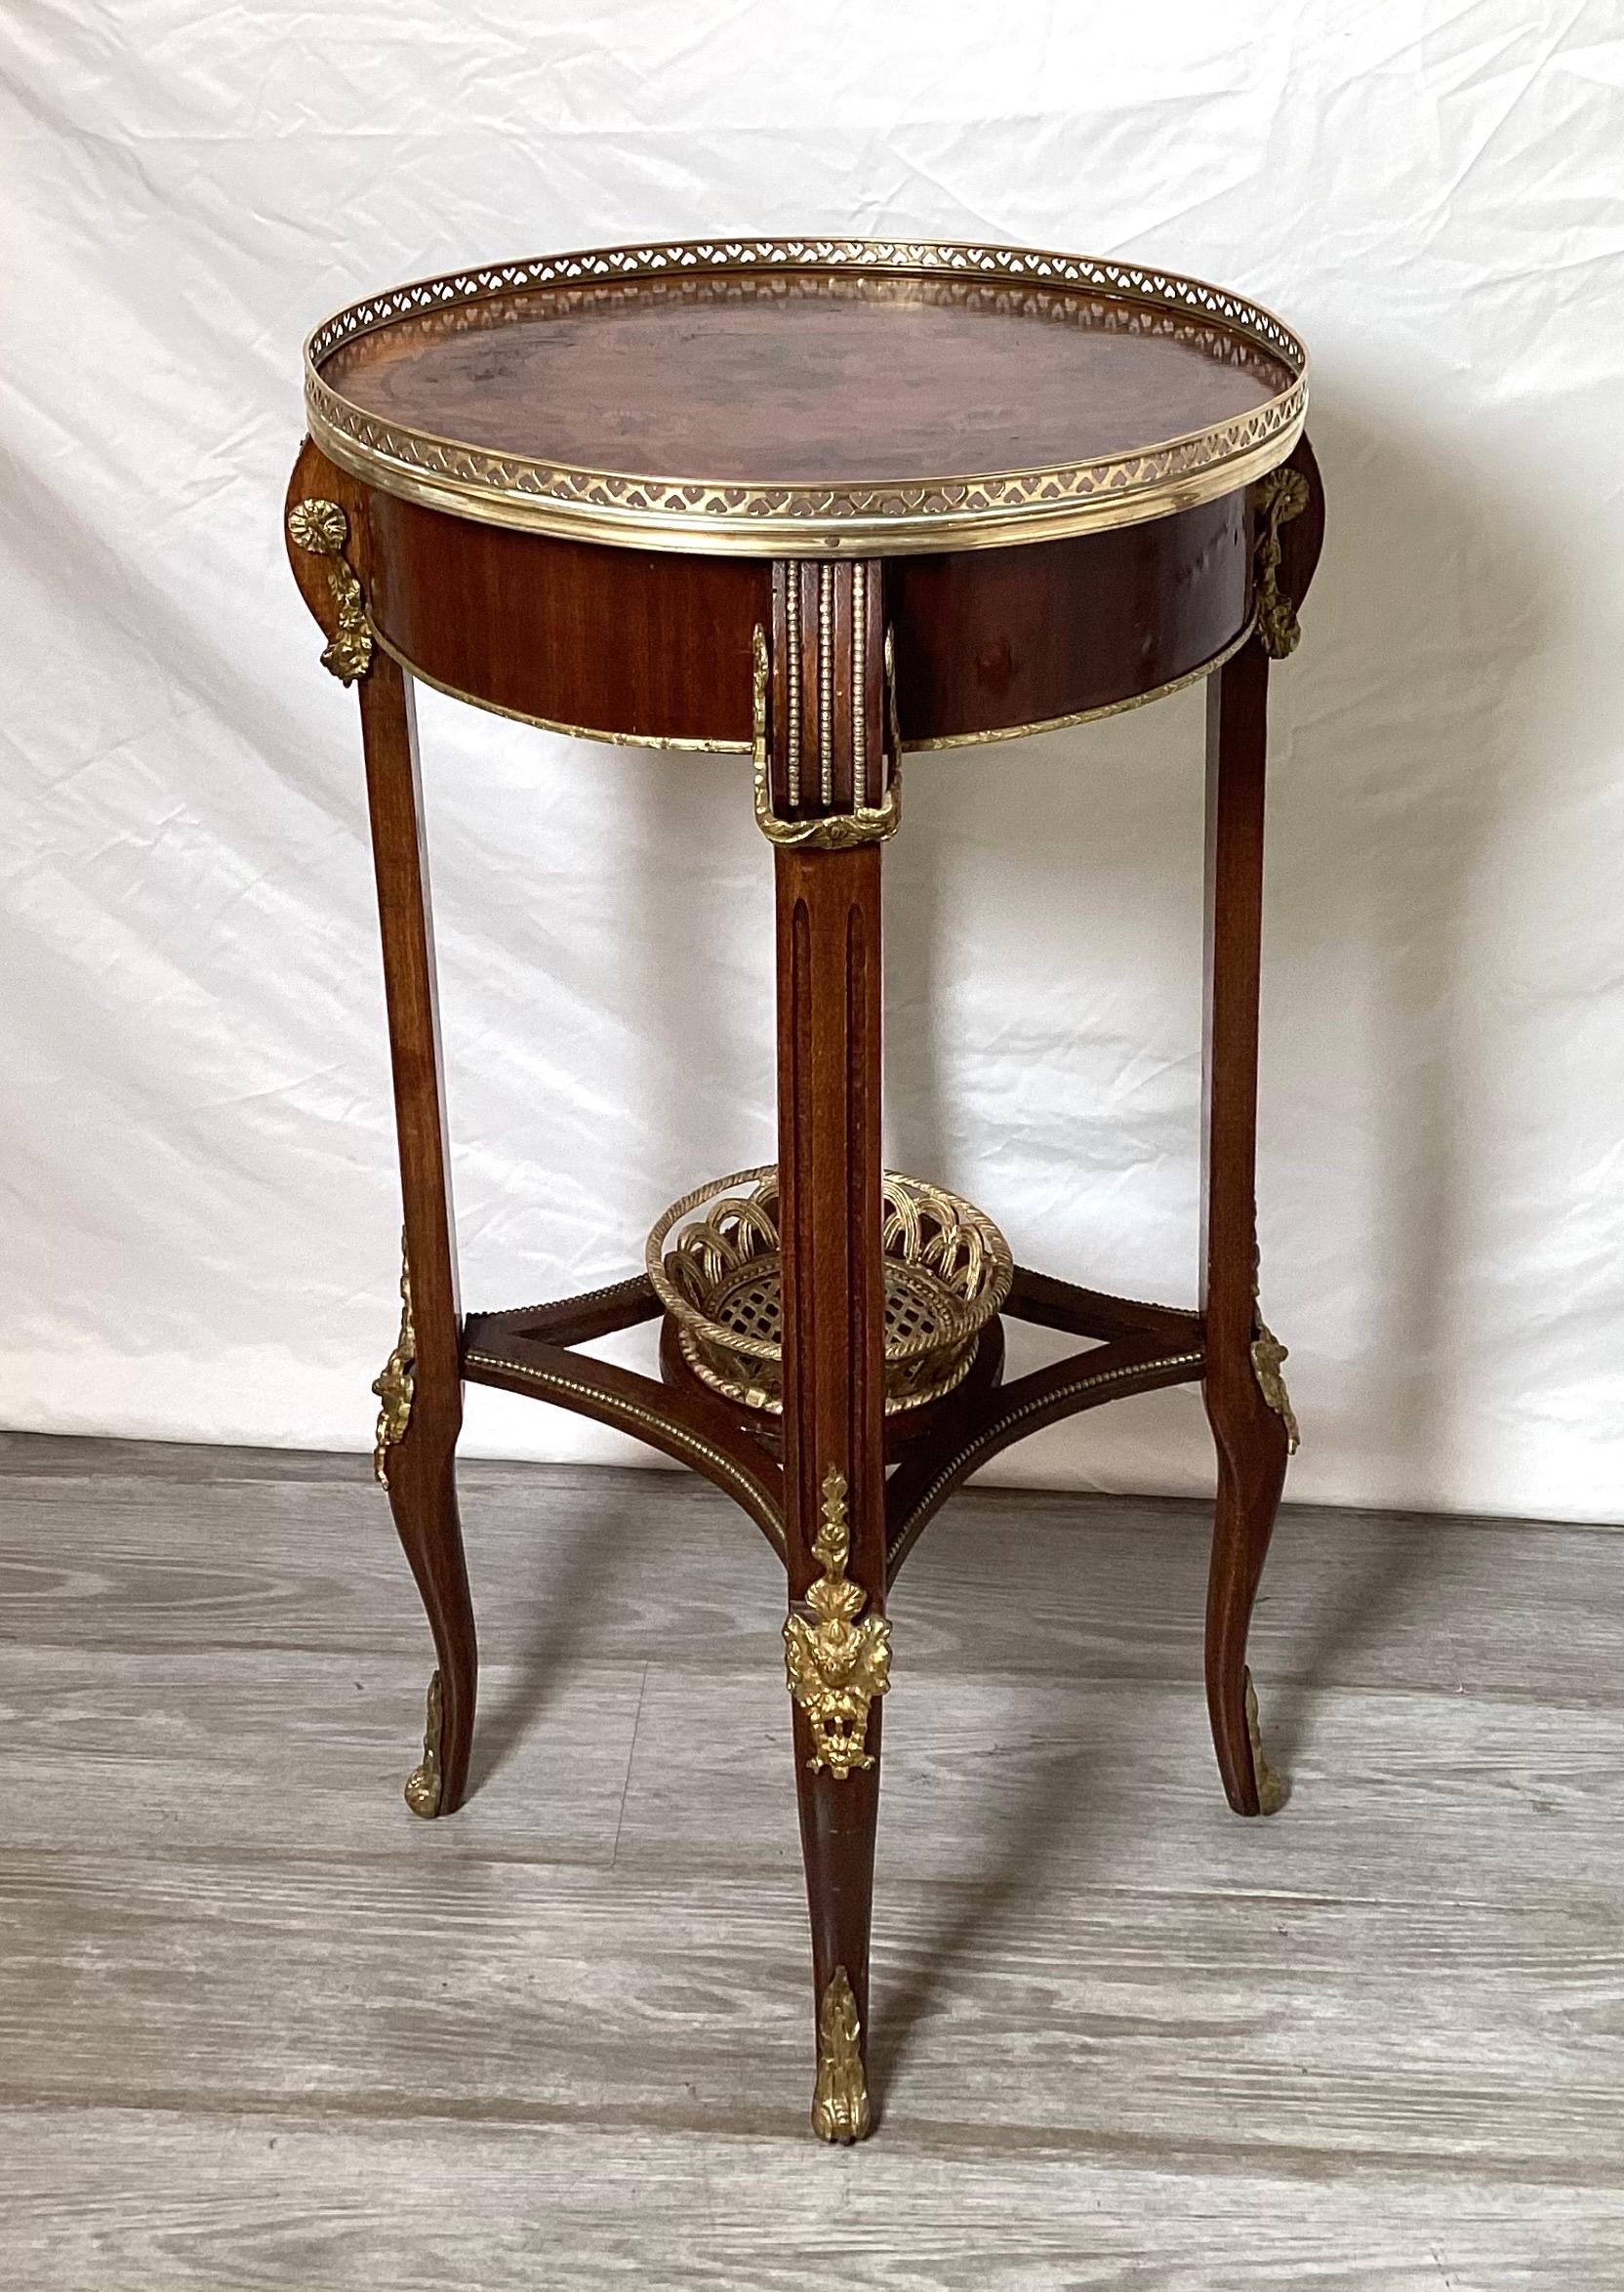 20th Century Mahogany and Tulip Wood Inlaid Gilt Mounted Gallery Table